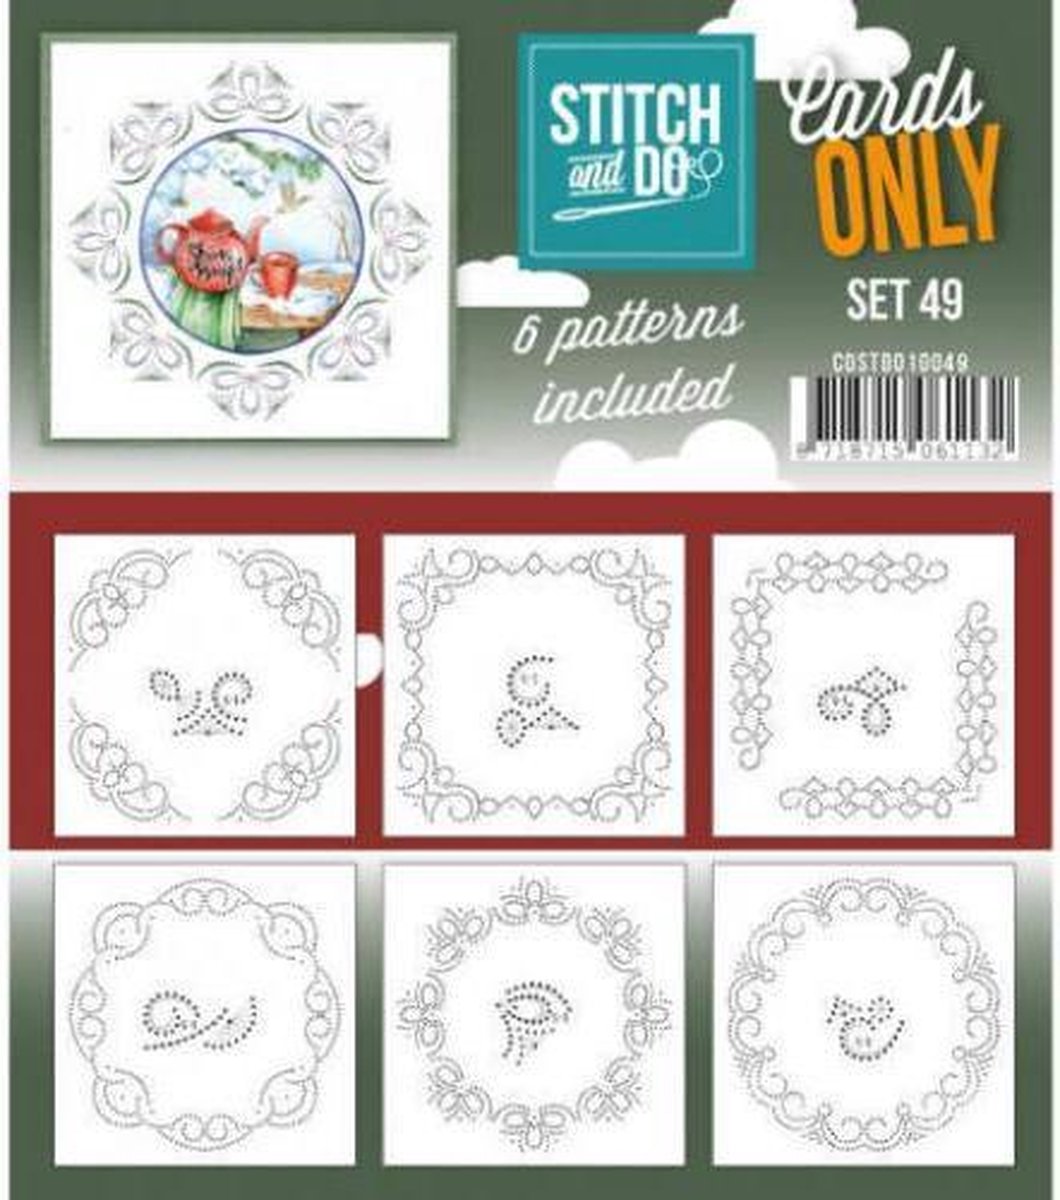 Stitch and Do Cards only 49